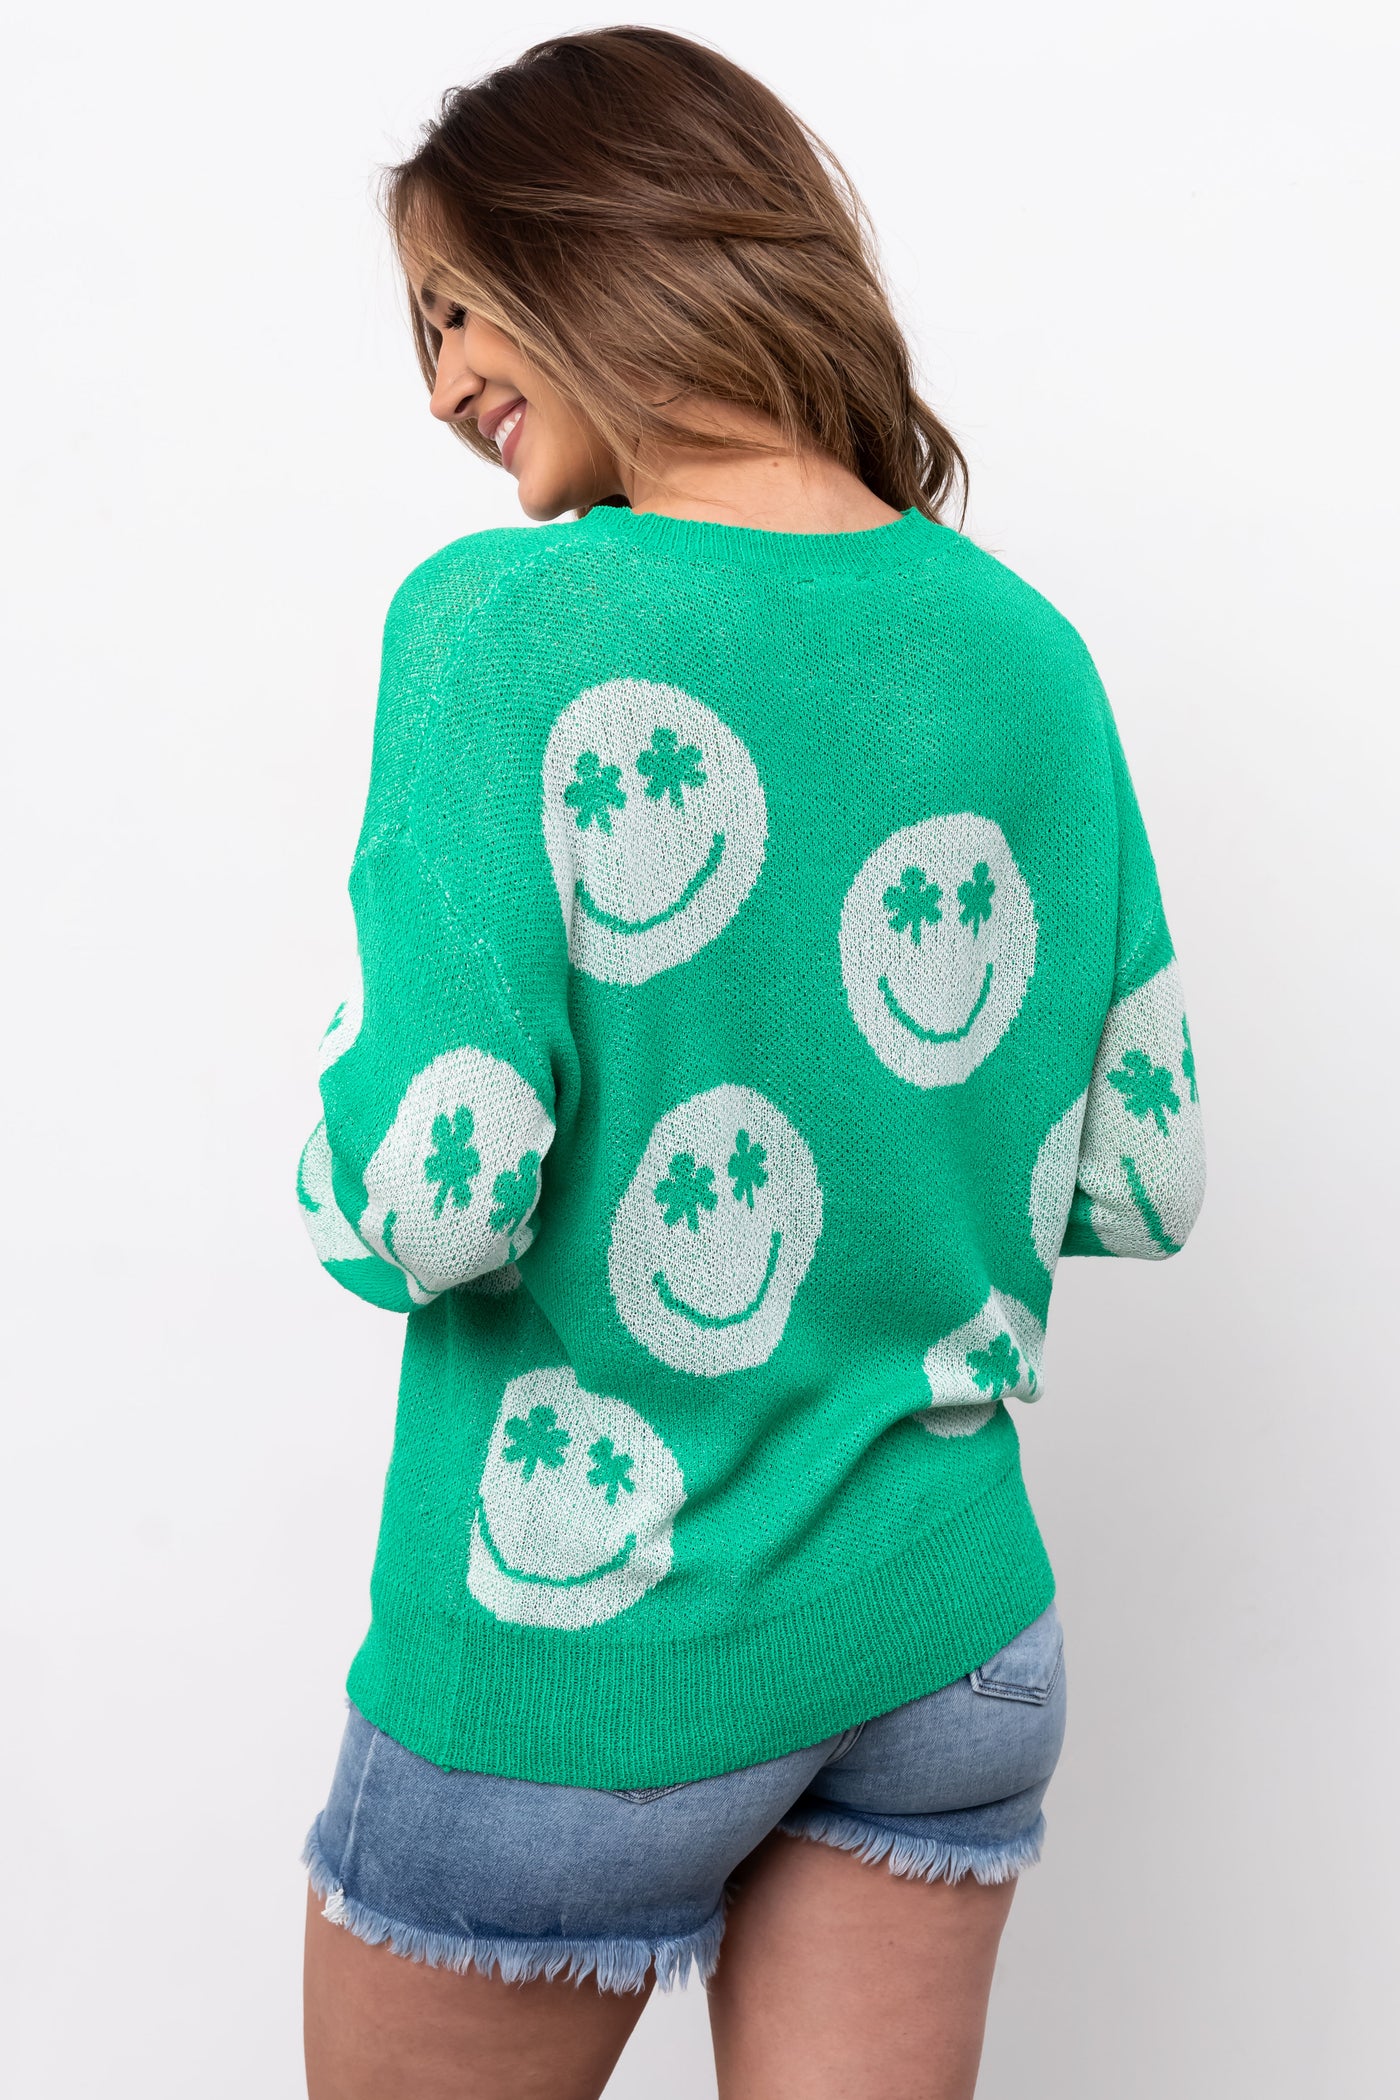 Kelly Green Clover Smiley Face Sweater